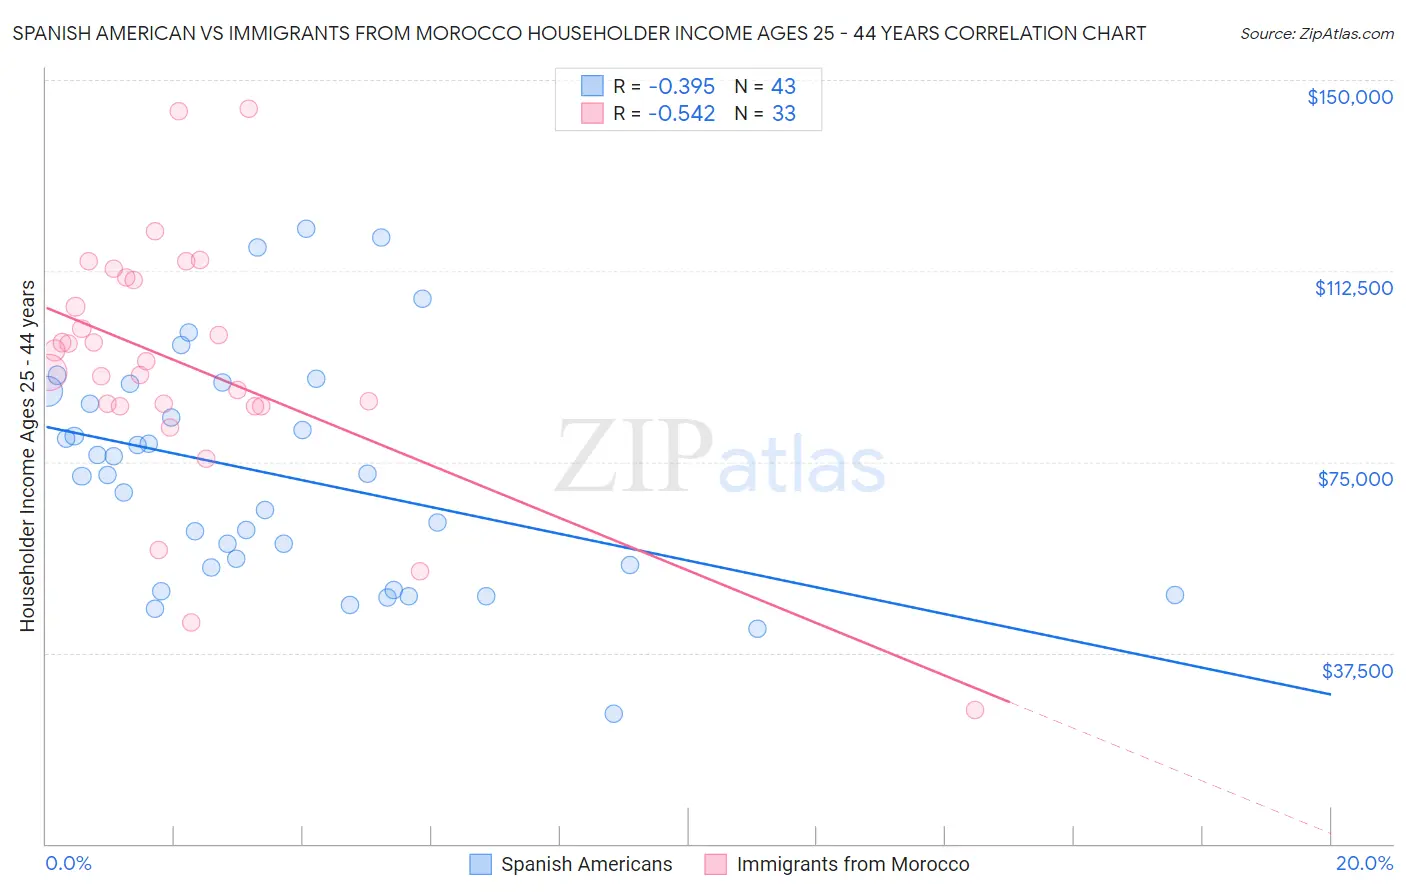 Spanish American vs Immigrants from Morocco Householder Income Ages 25 - 44 years